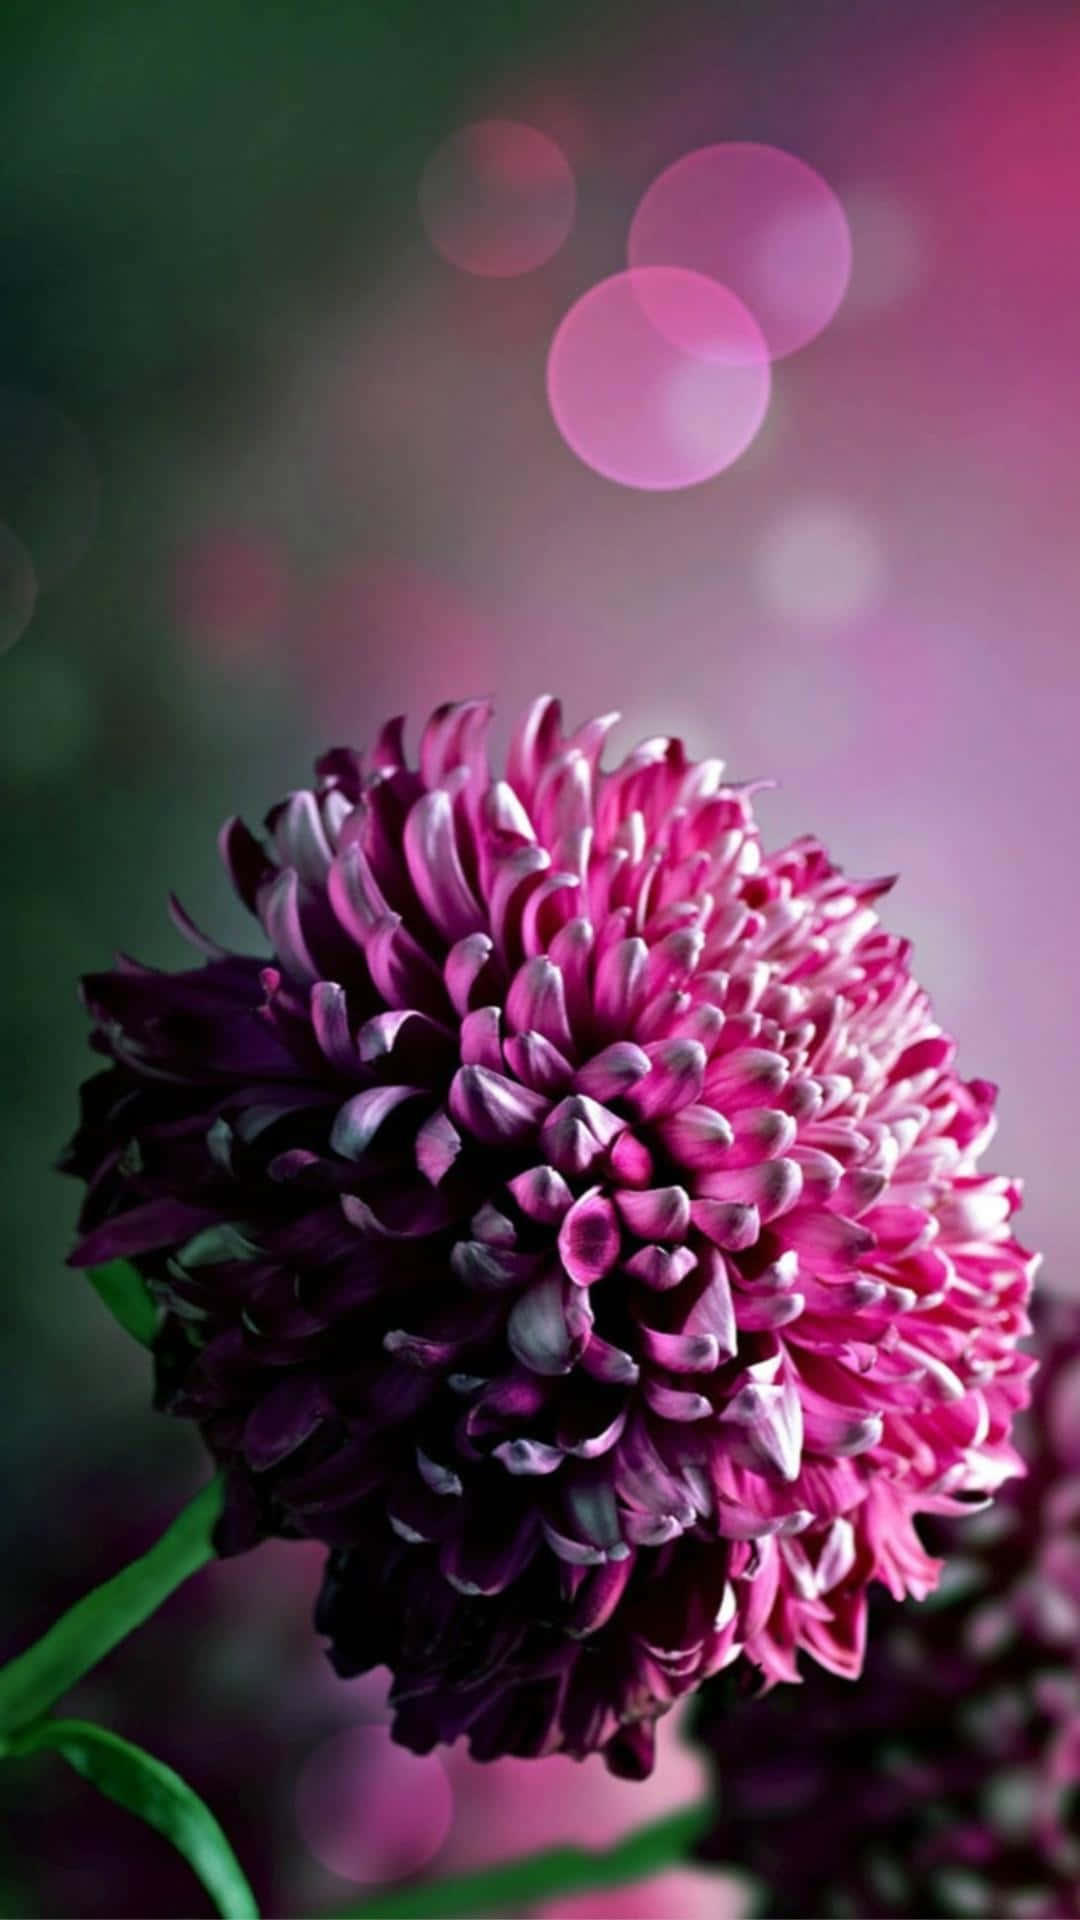 Capture the beauty of spring with this stunning flower iphone background.